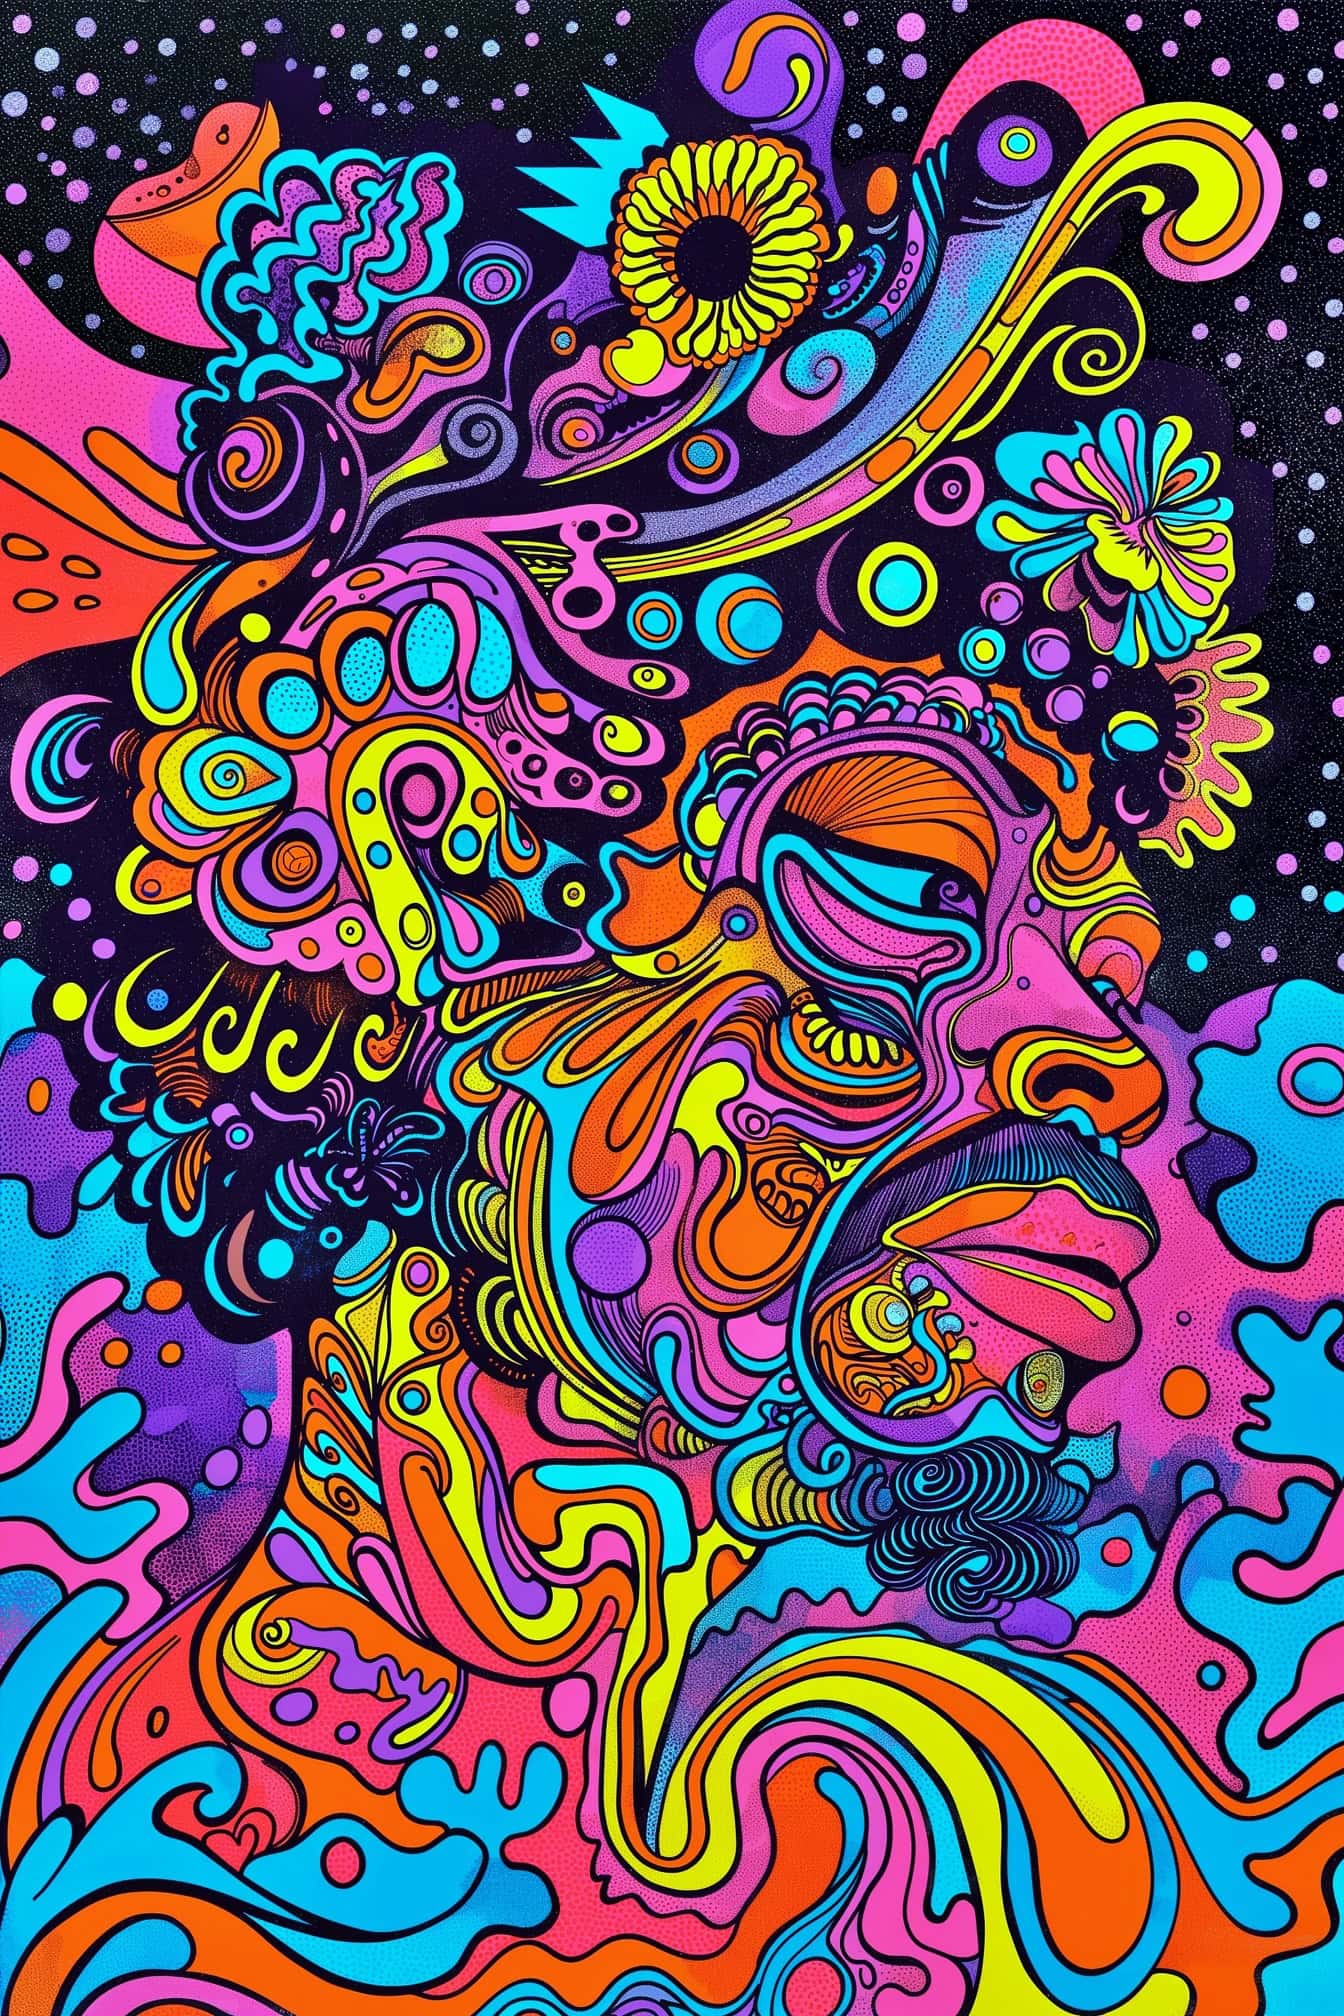 Colorful abstract psychedelic artwork of a man in pop art style